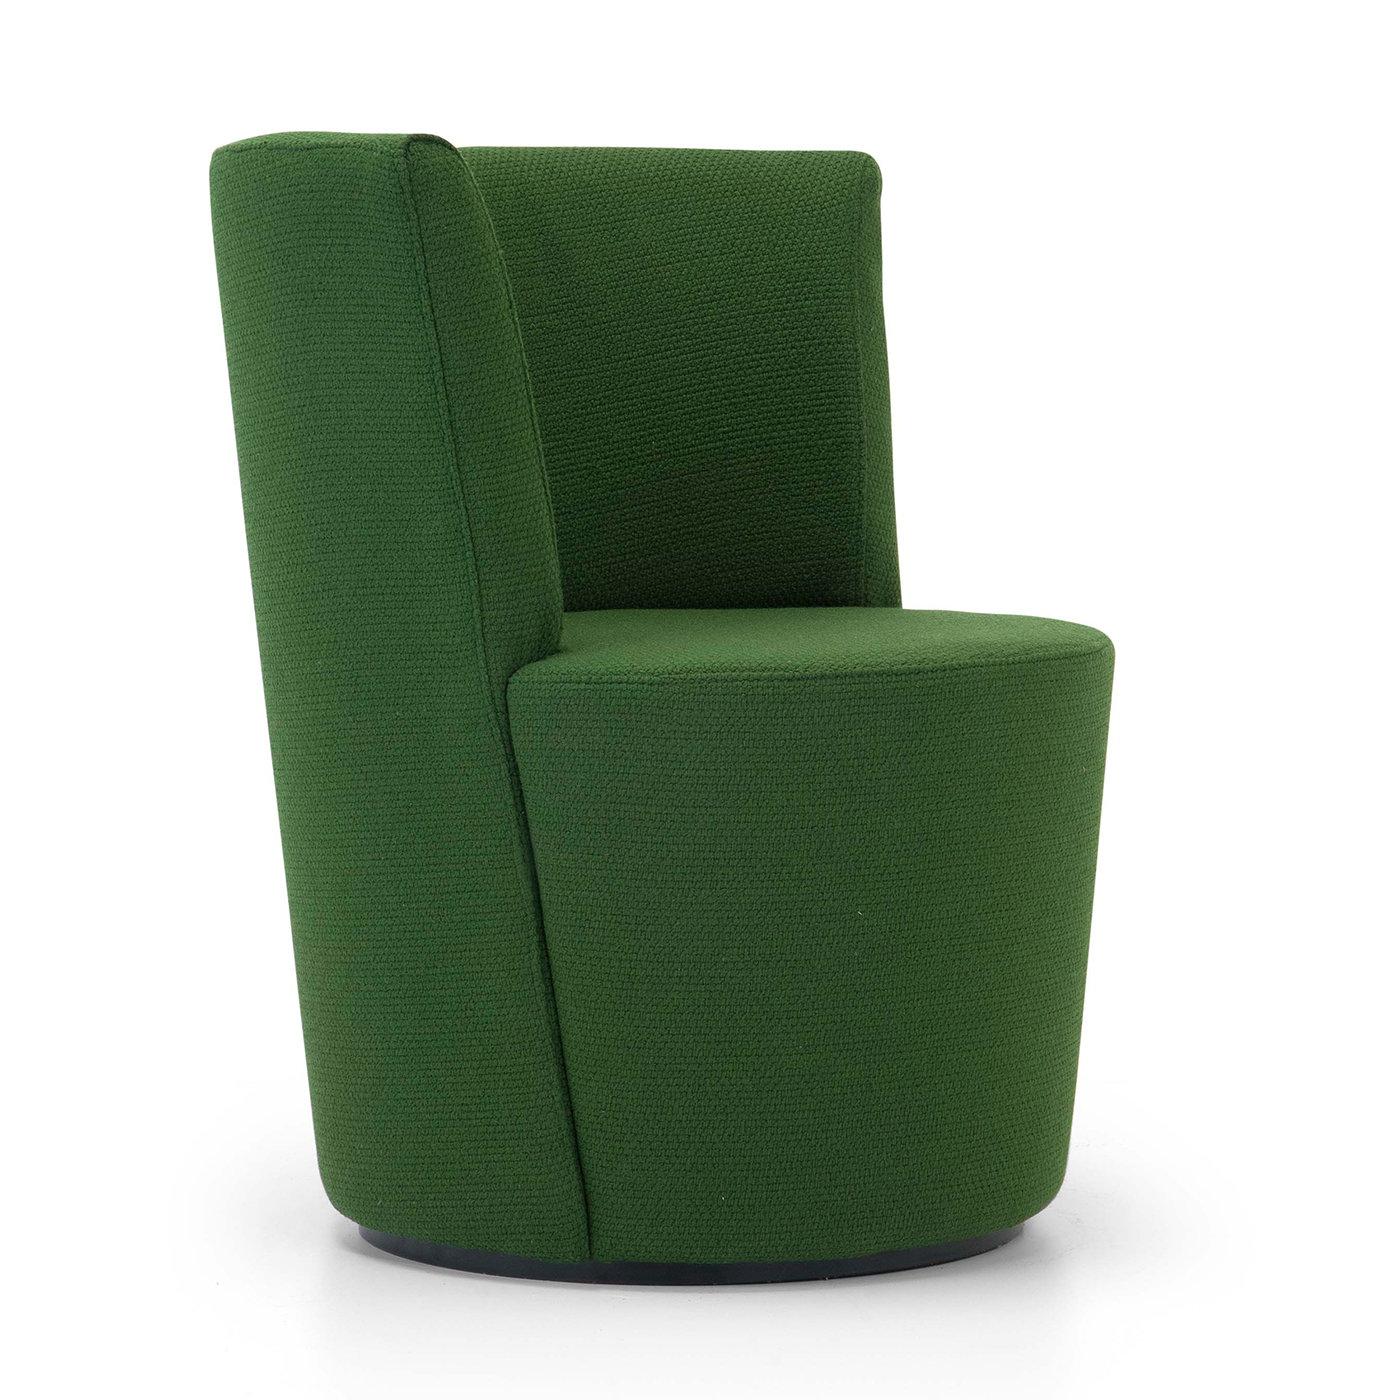 Defined by a stunning monocoque structure, this unique armchair has a soft, smooth, and comfortable shape featuring a sophisticated Dacron cover in vibrant green over a multi-density polyurethane padding that looks and feels like a nest dedicated to